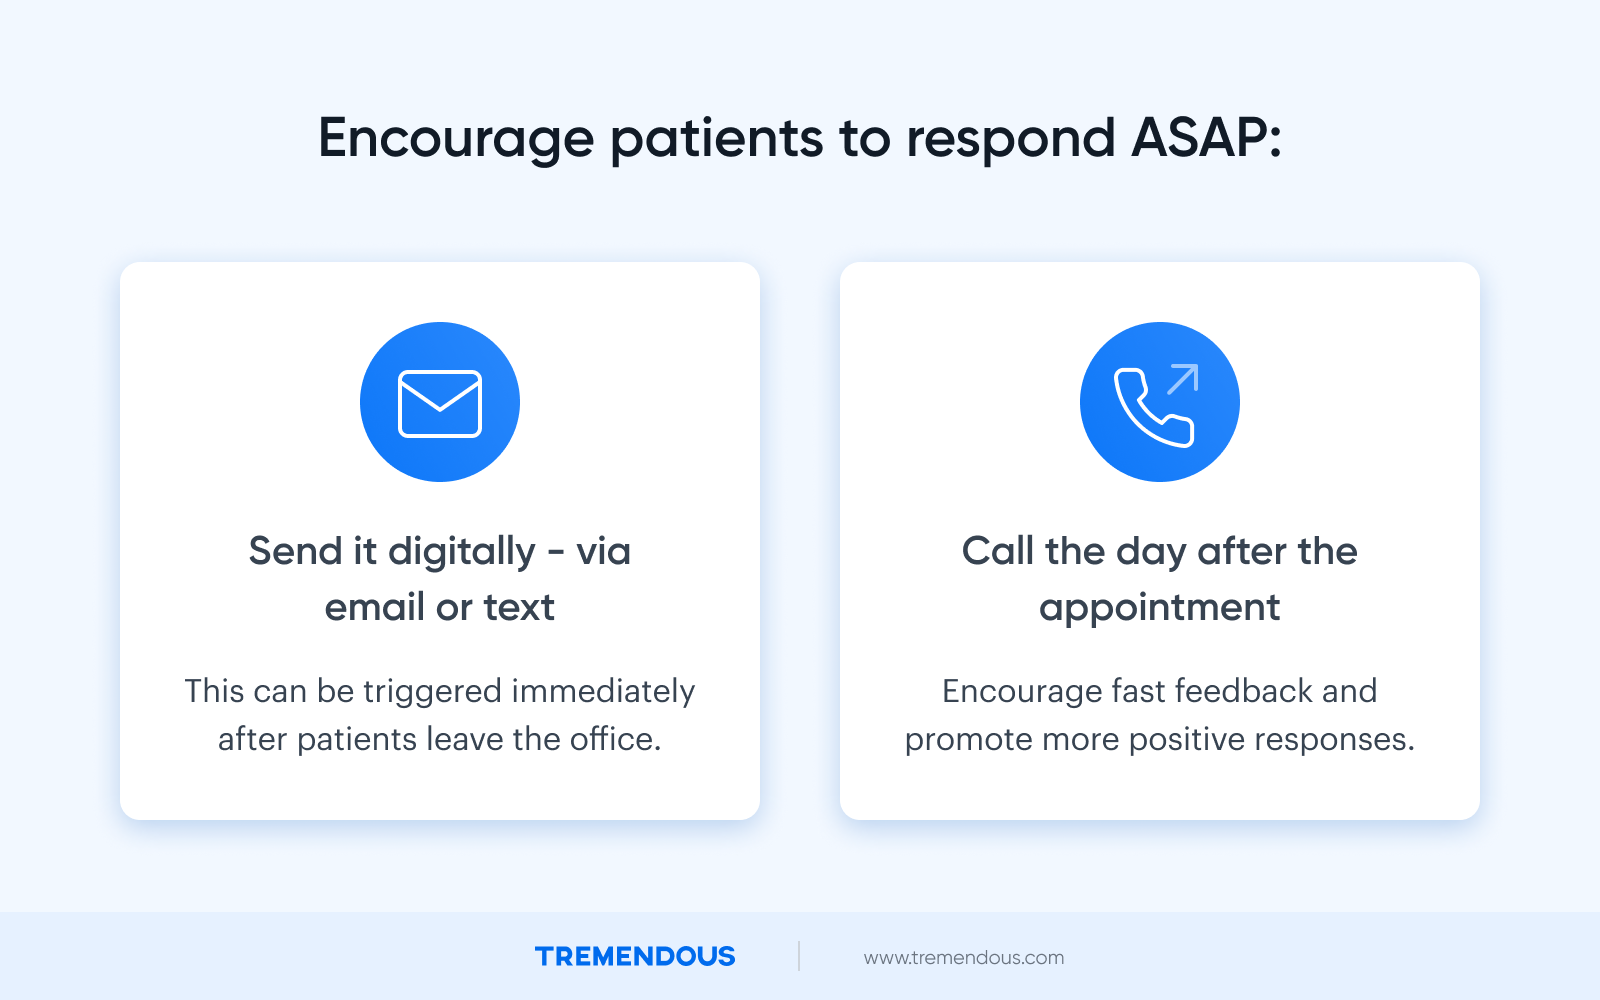 At the top, text reads: "Encourage patients to respond ASAP:" On the left, text reads: "Send digitally - via email or text." On the right, text reads: "Call the day after the appointment."